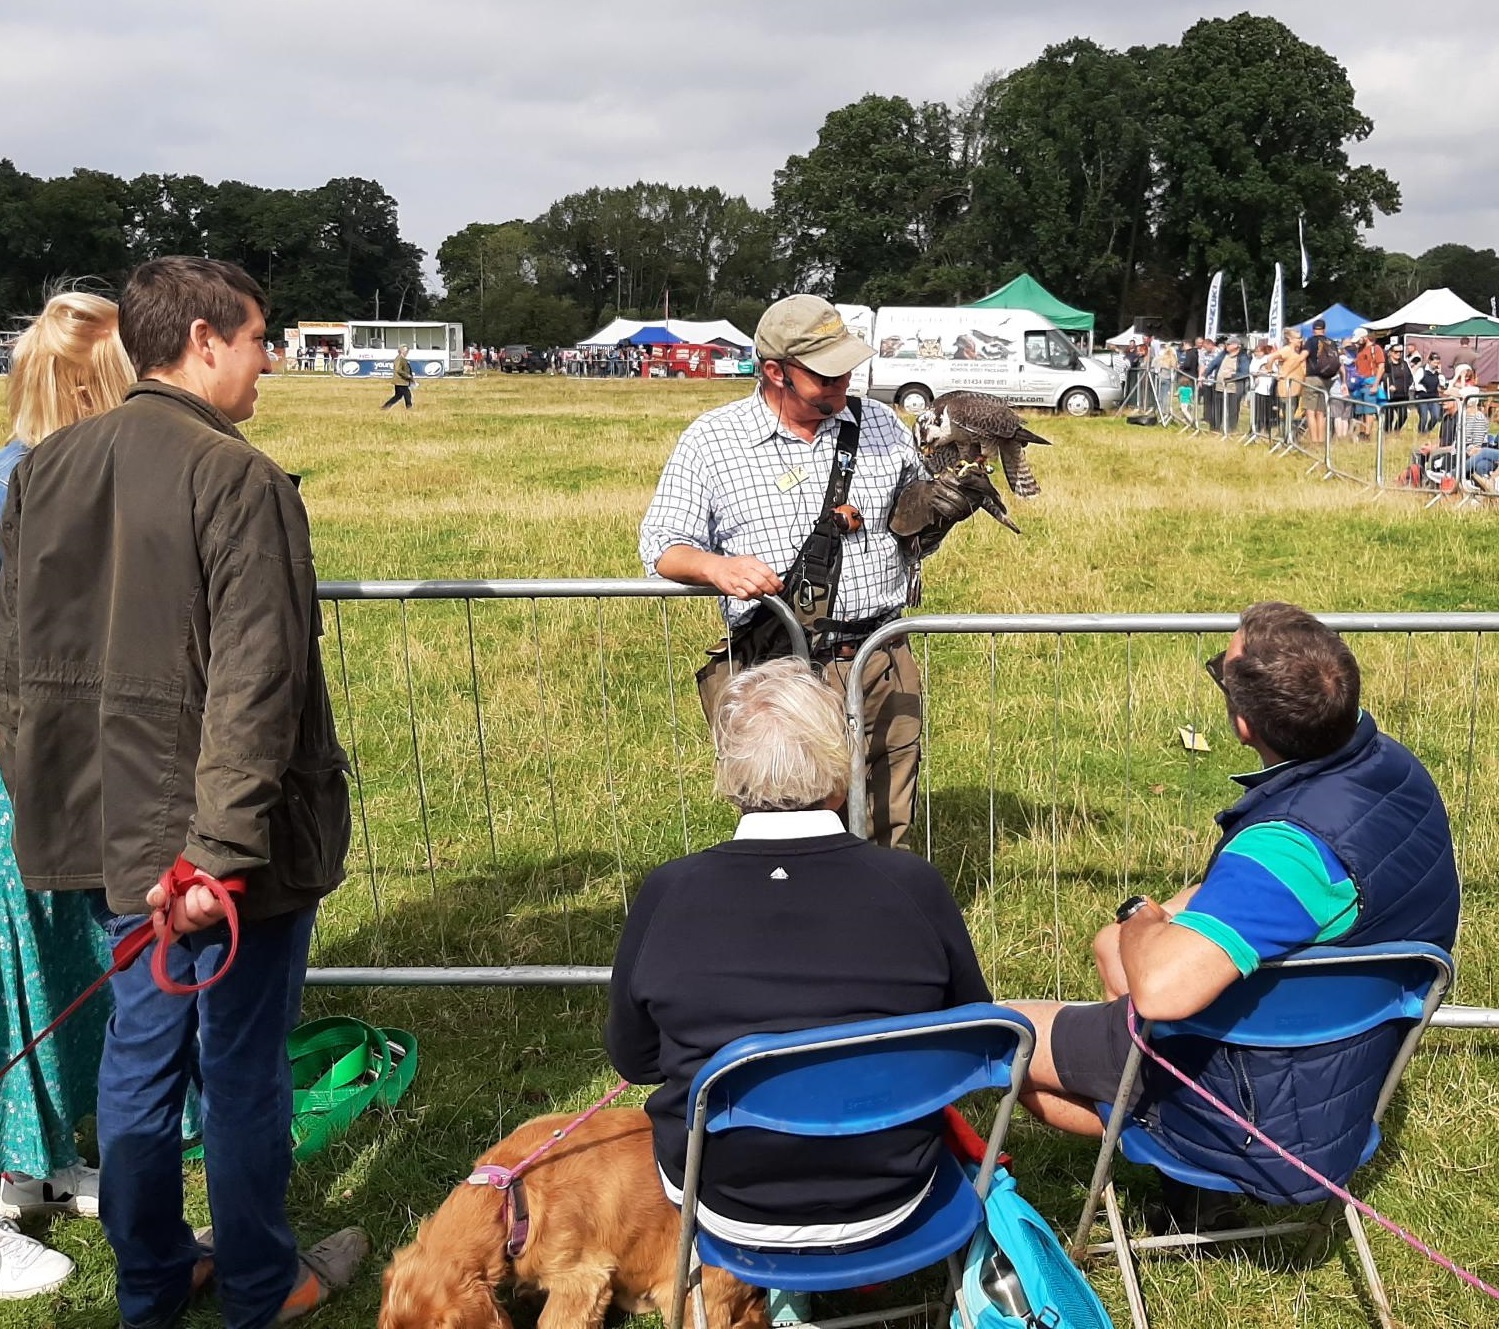 A recovered Boris the bird of prey is shown off to show-goers after his mishap in the main ring